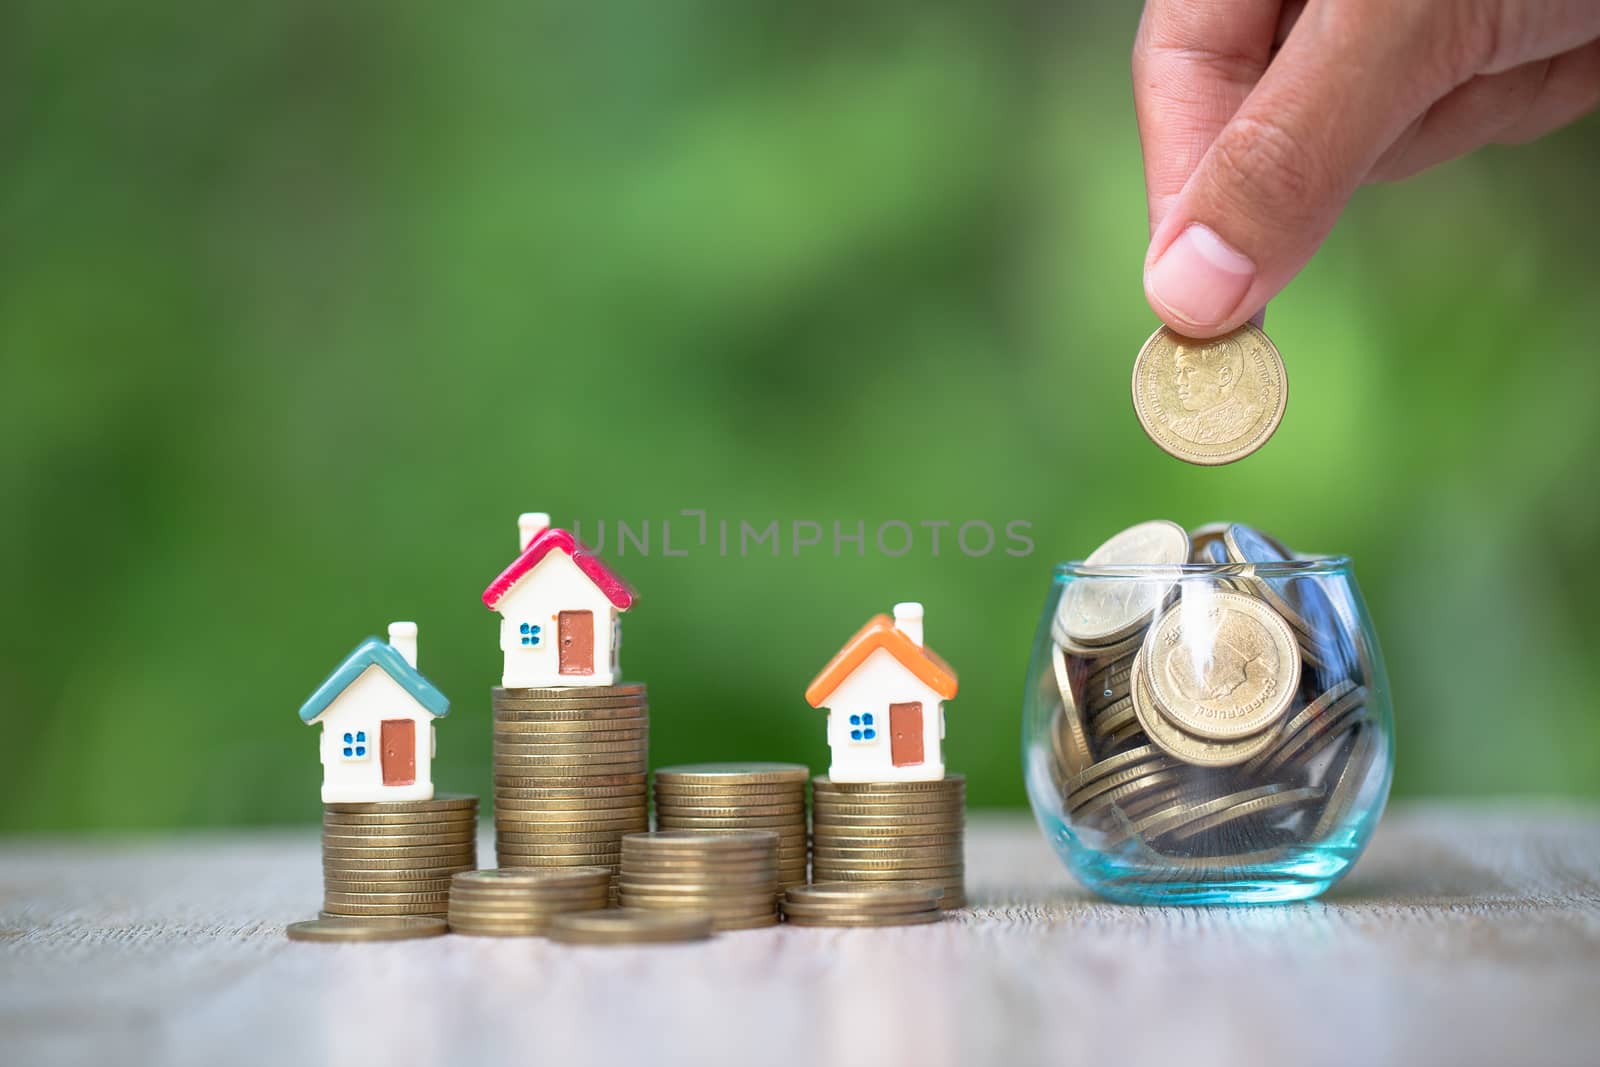 House on a pile of coins. A coin in a glass bottle The hand is about to coin. The concept of business growth Saving money real estate accounting Investment risk.